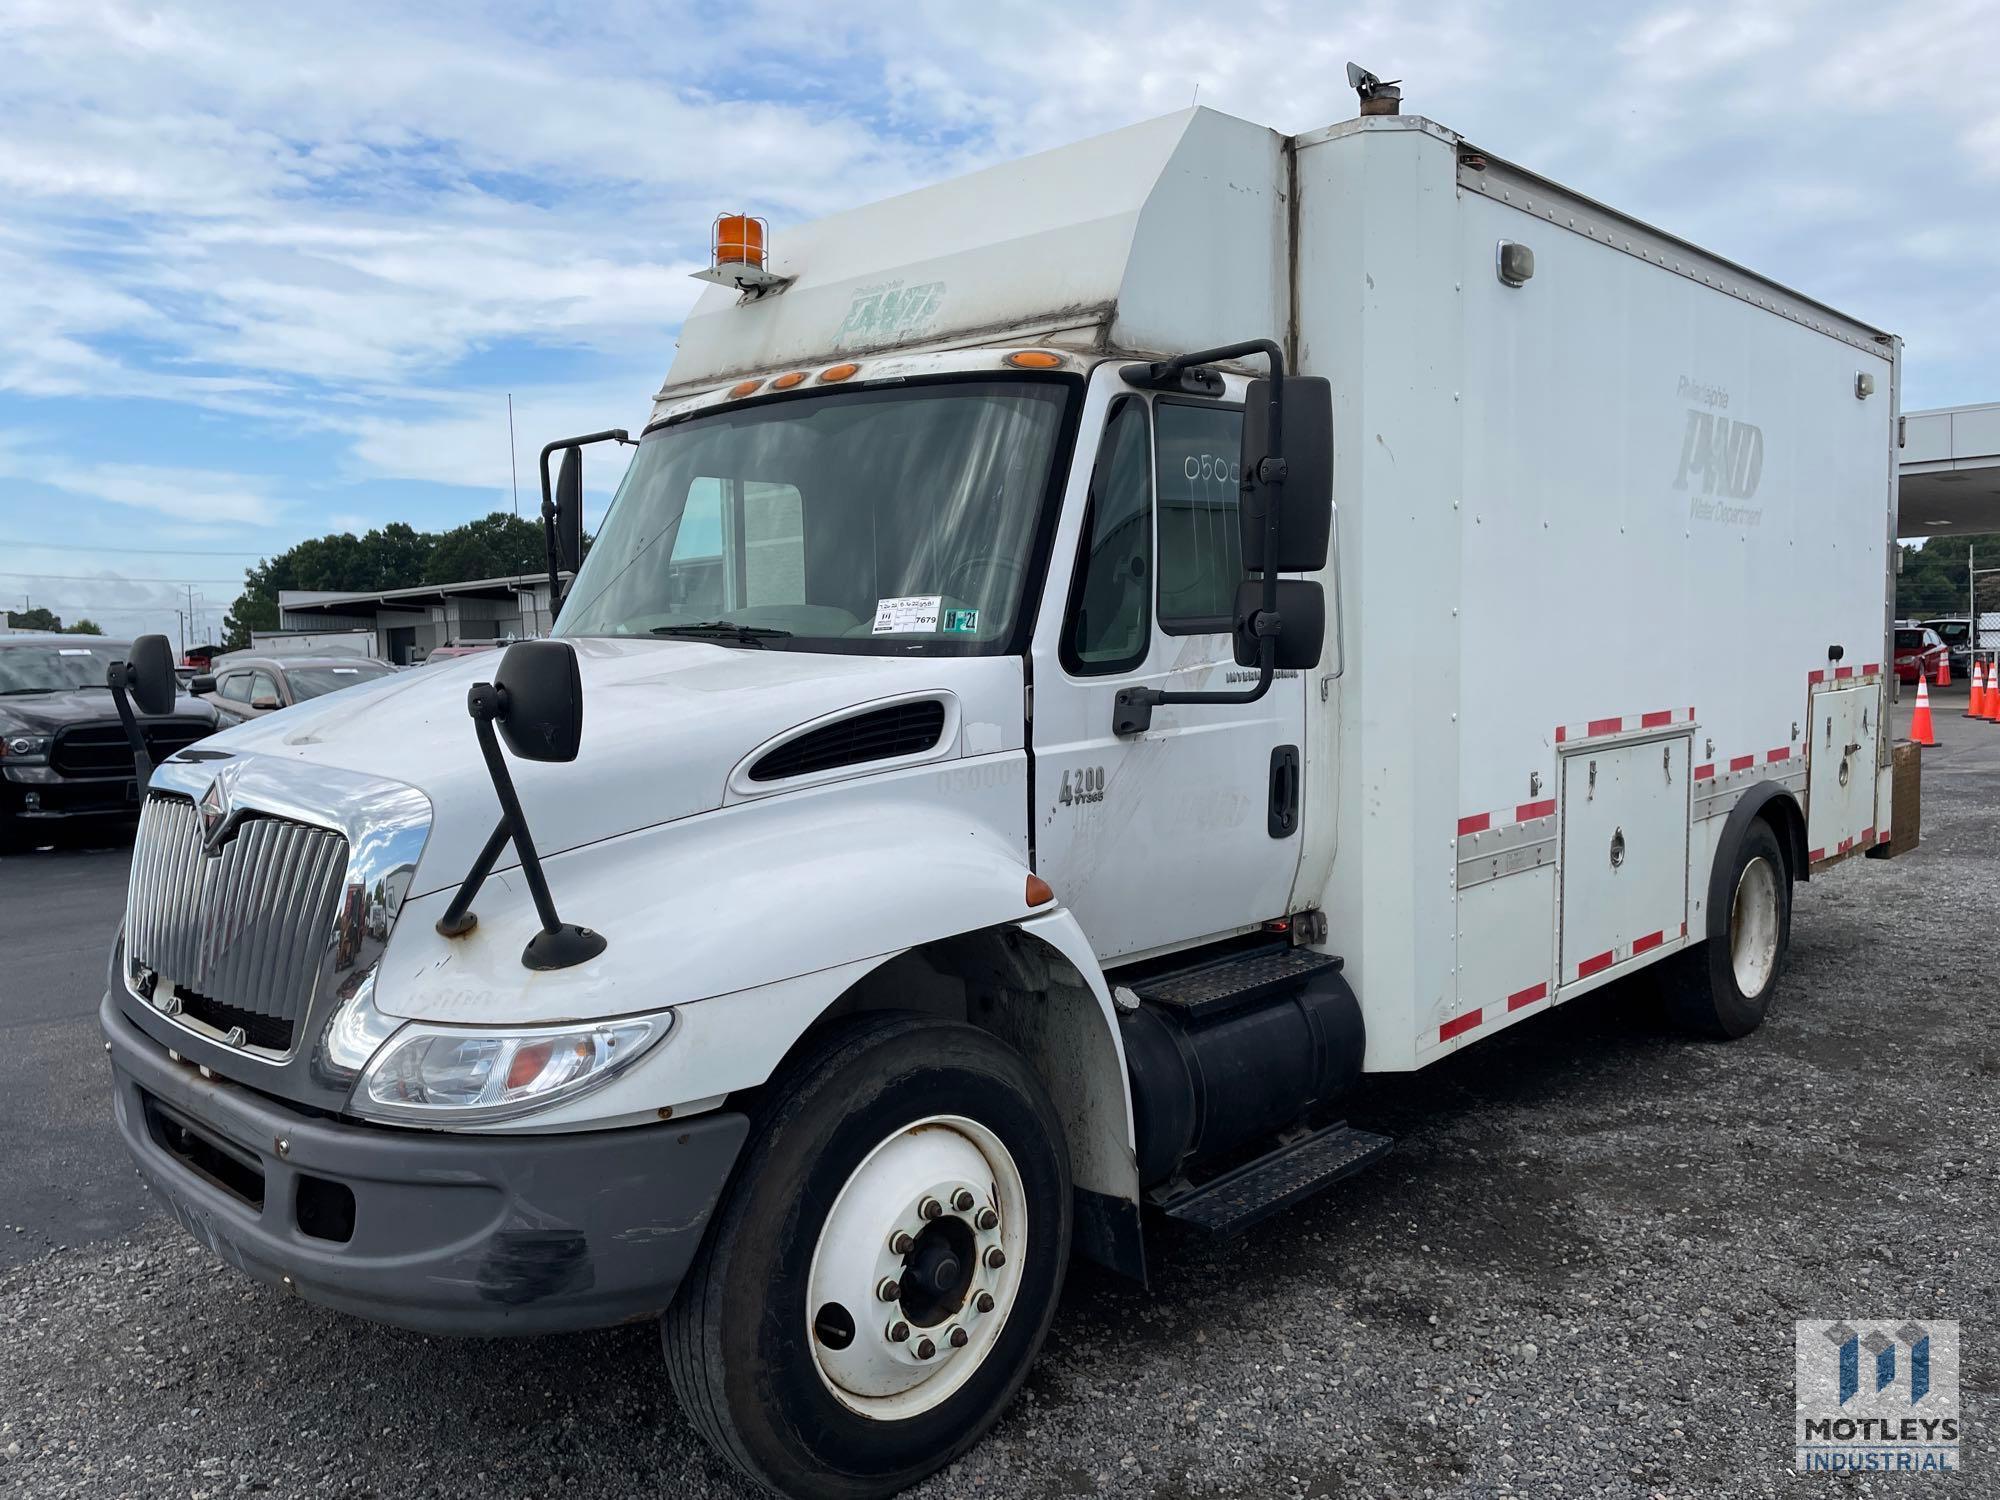 2005 International 4200 Extended Cab Utility Truck